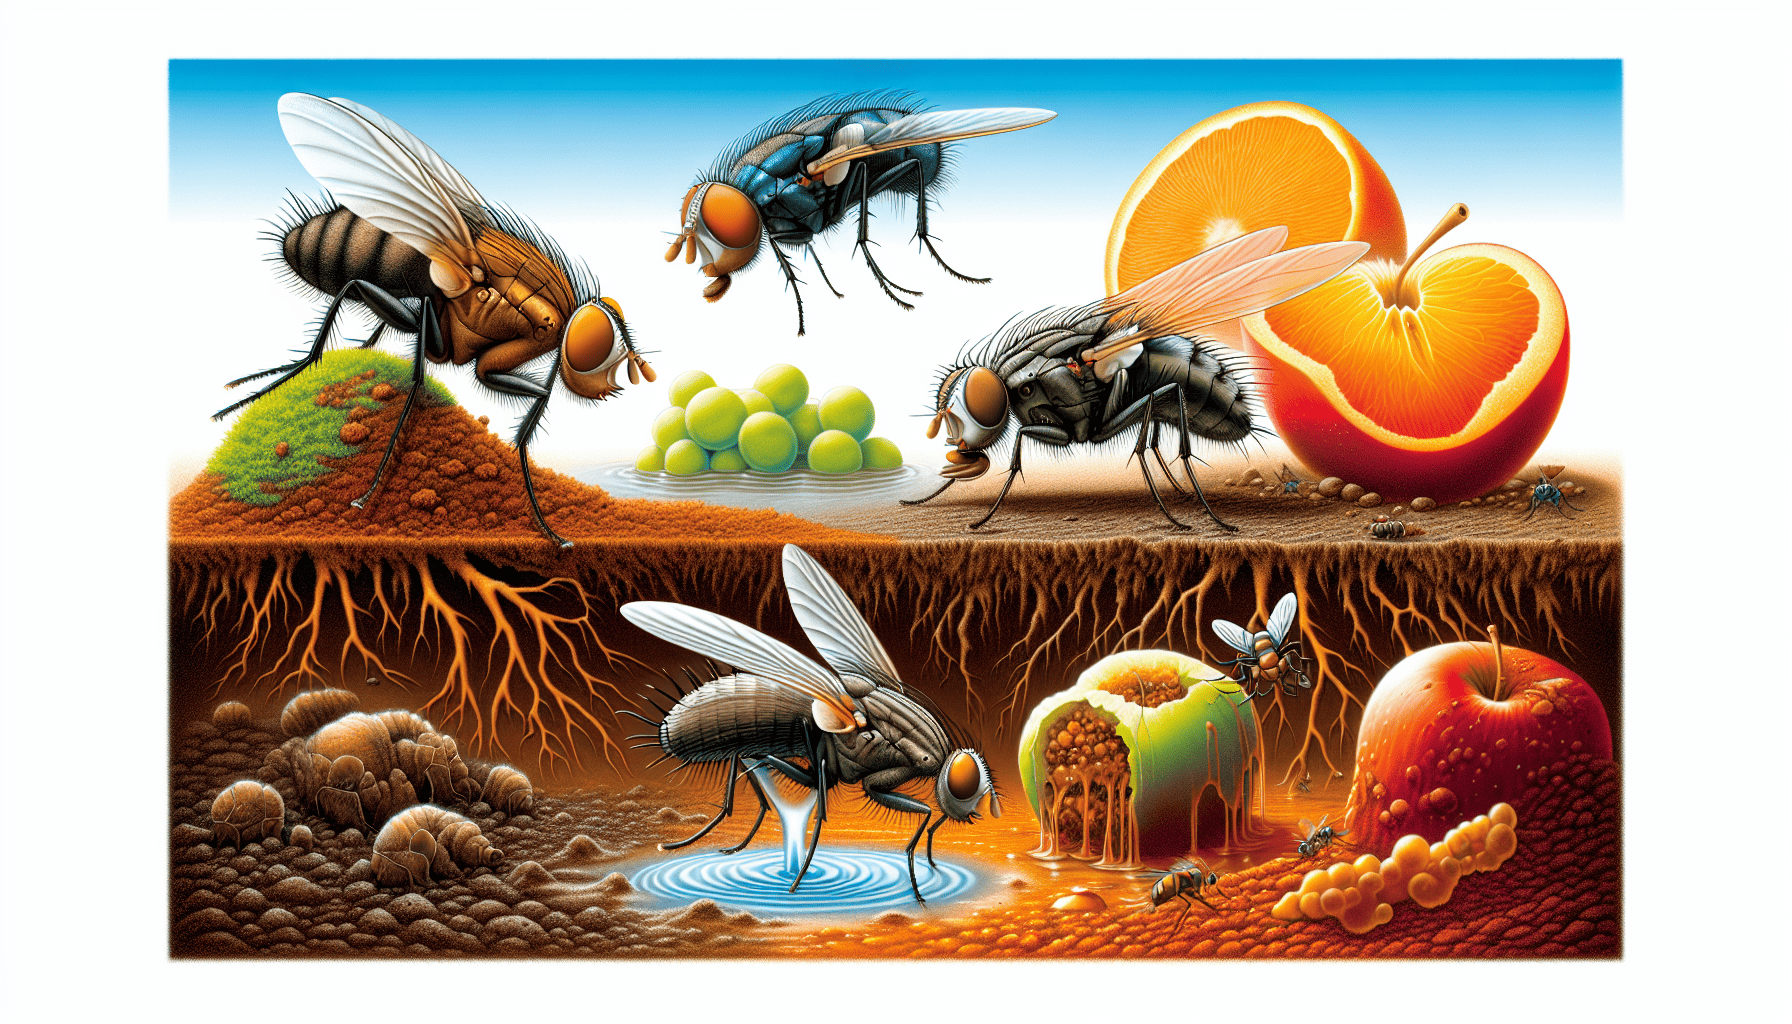 Illustration of various types of gnats and their habitats